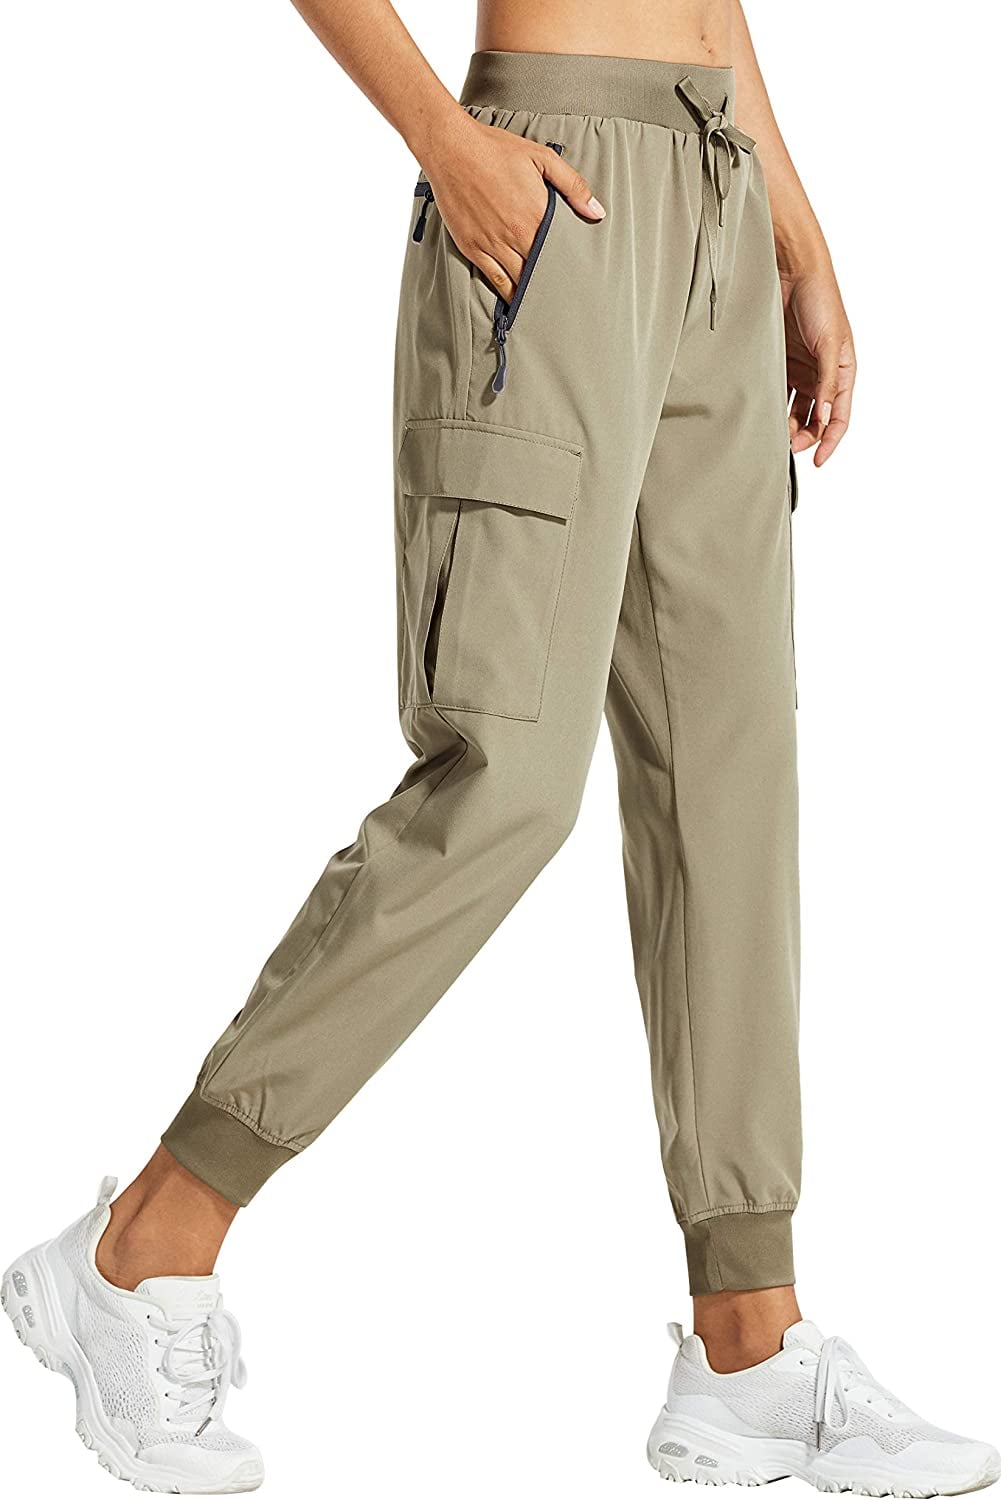 Buy Latest & Trendy Women Trousers Online at an Amazing Price